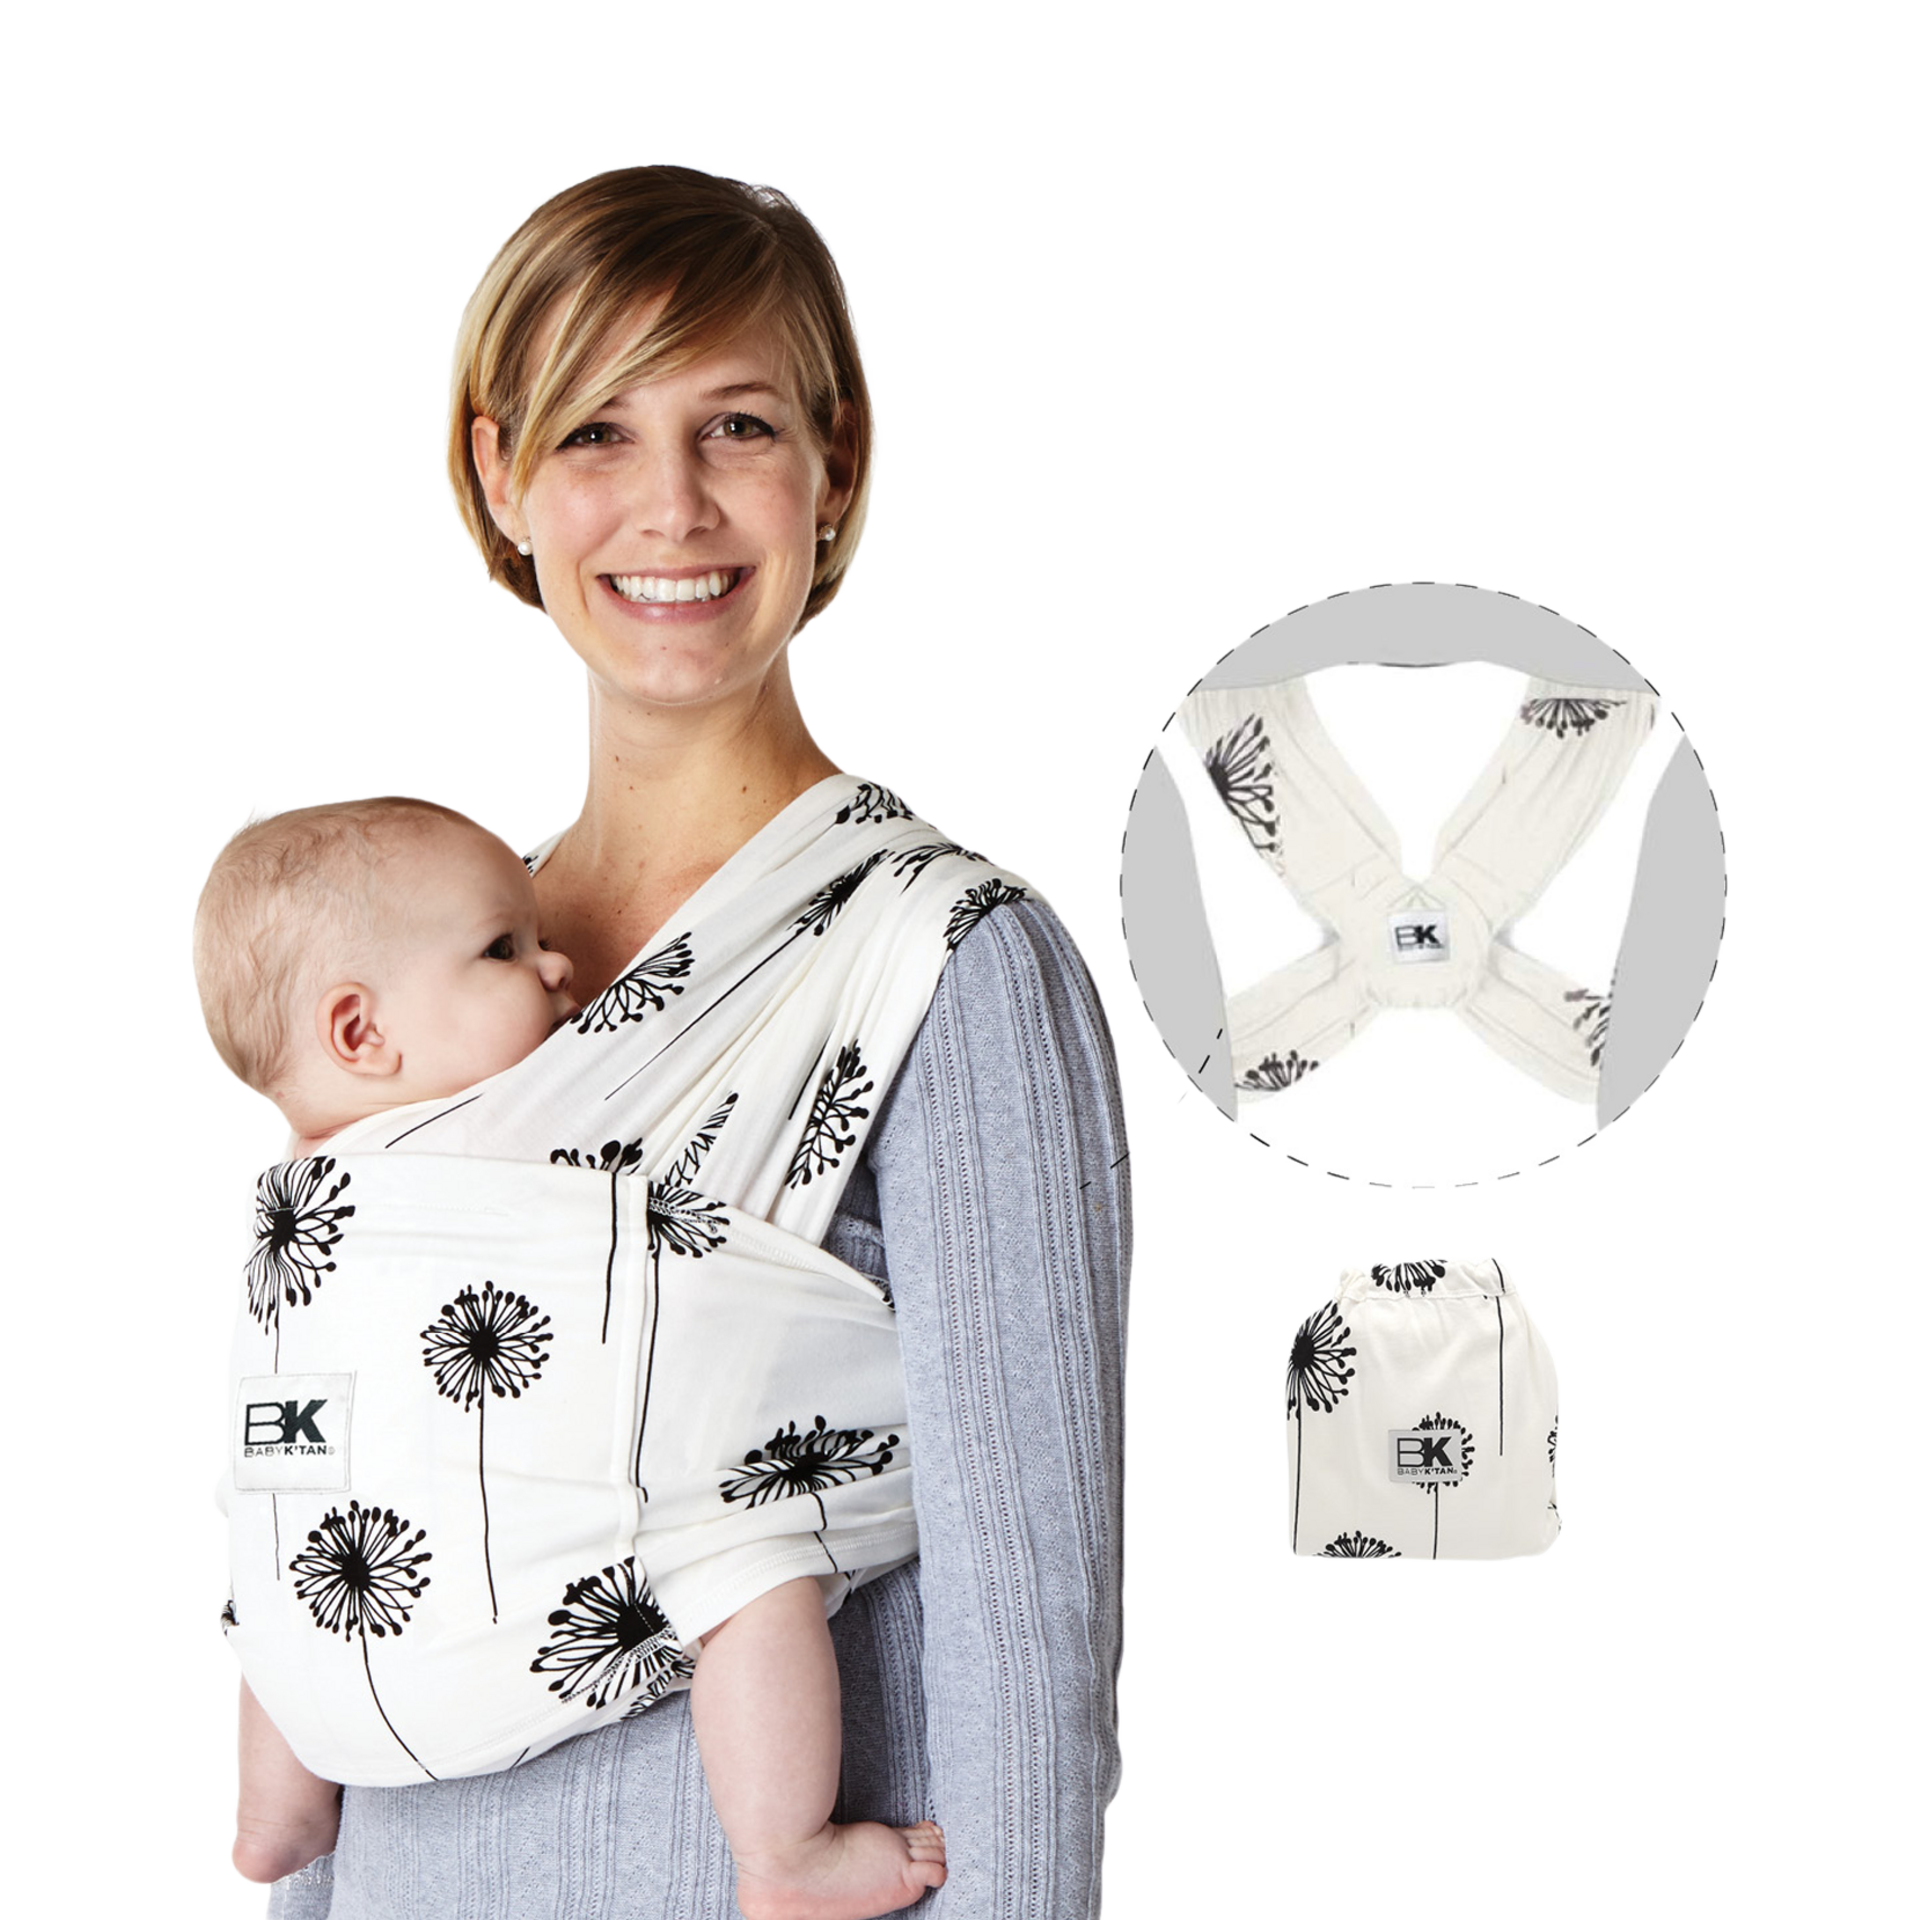 Newborn up to 35 lbs W Dress 16-20 / M Jacket 43-46 Infant and Child Sling-Black L Best for Babywearing. Baby Ktan Breeze Baby Wrap Carrier 